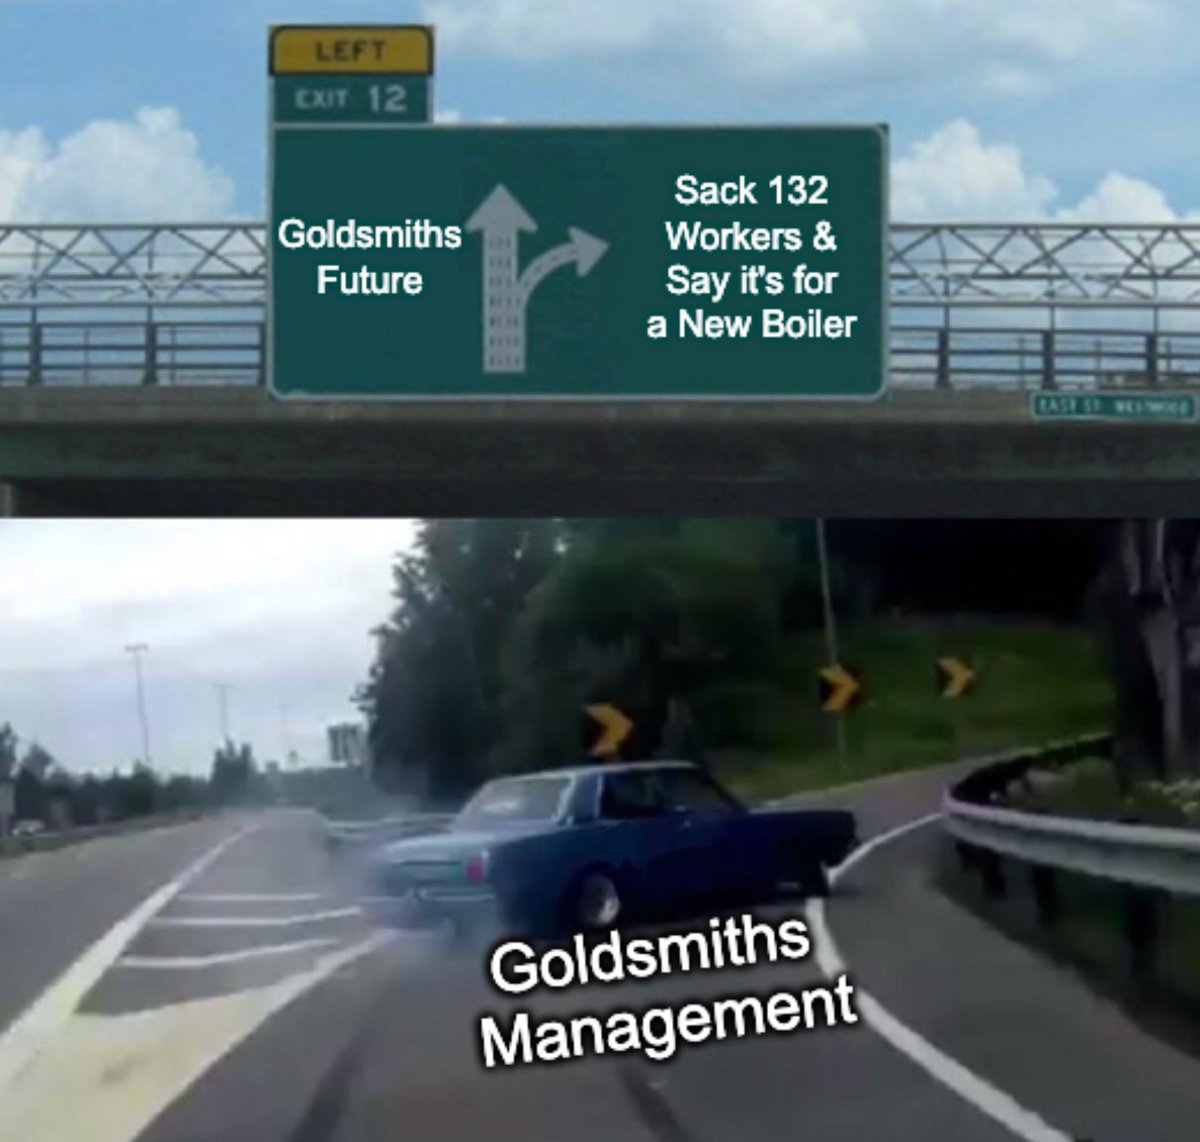 THEY SAID: Goldsmiths was facing a £13.1 million hole in its budget that only an unprecedented wave of redundancies could plug. BUT NOW WE KNOW: Goldsmiths has saved £10.1 million through Voluntary Severance &cost-saving measures that have ALREADY significantly reduced staffing.